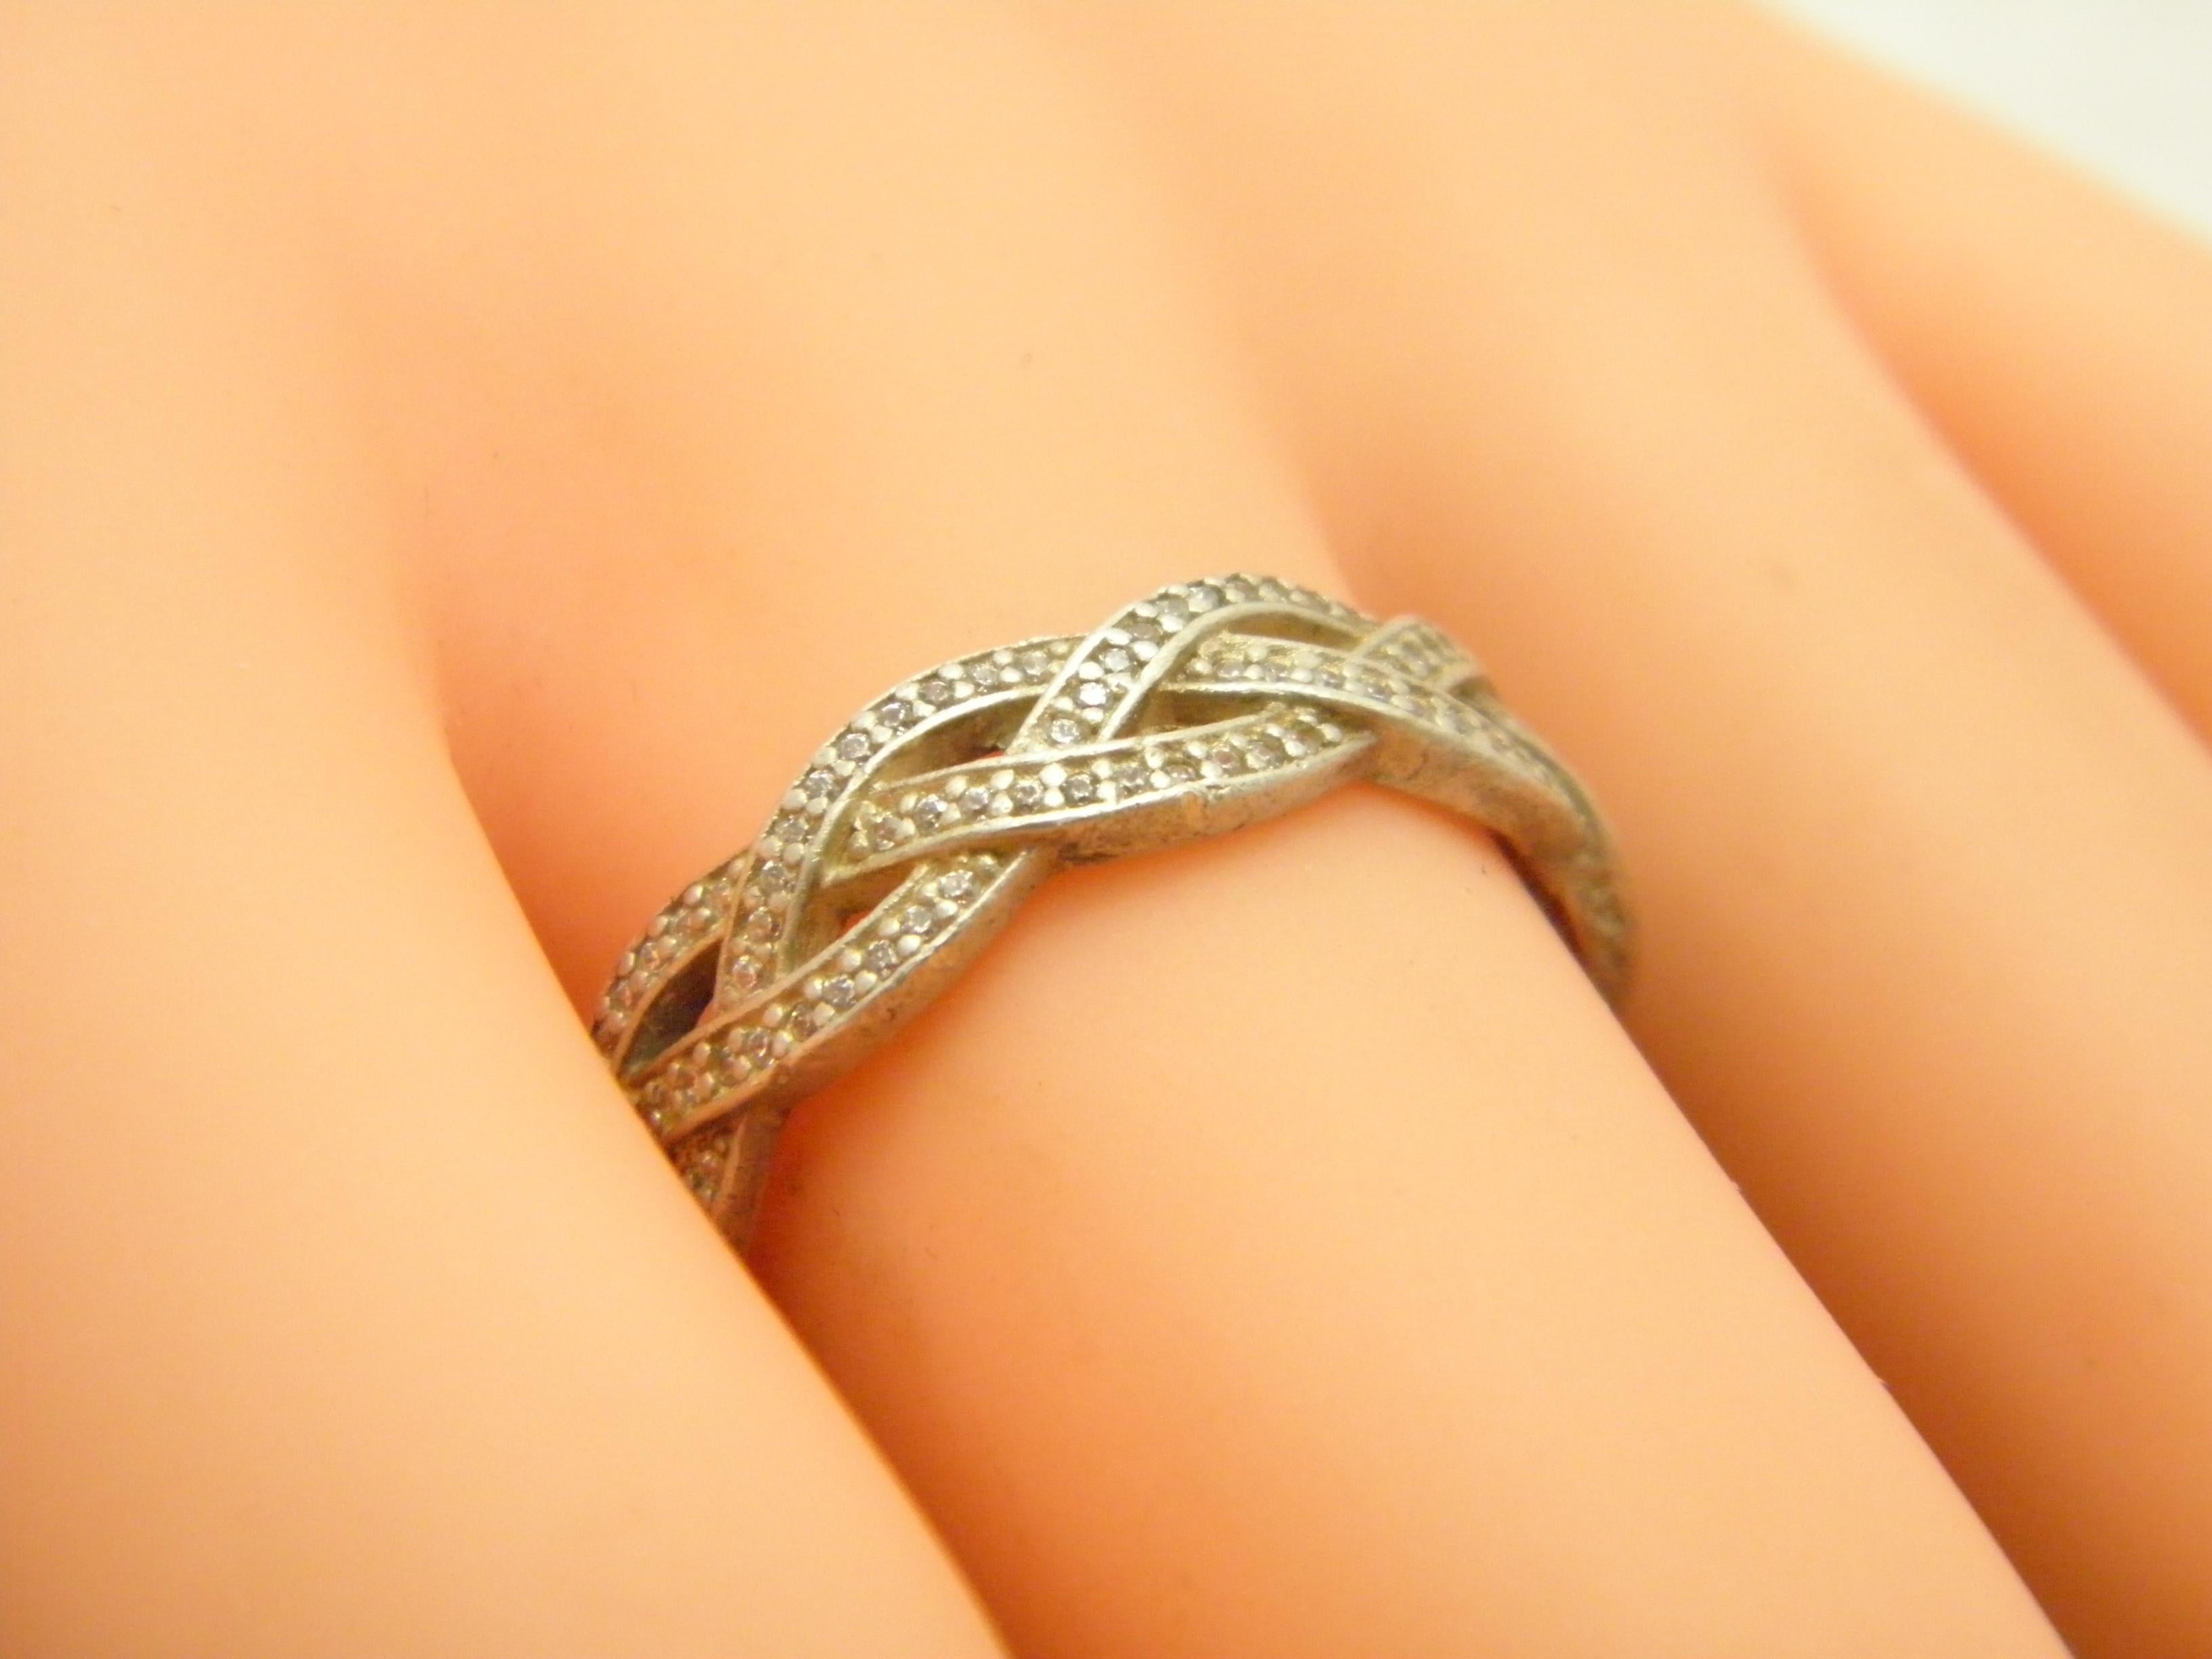 Vintage Palladium Diamond 6mm Celtic Weave Ring Size S 9.25 950 Purity Band For Sale 2